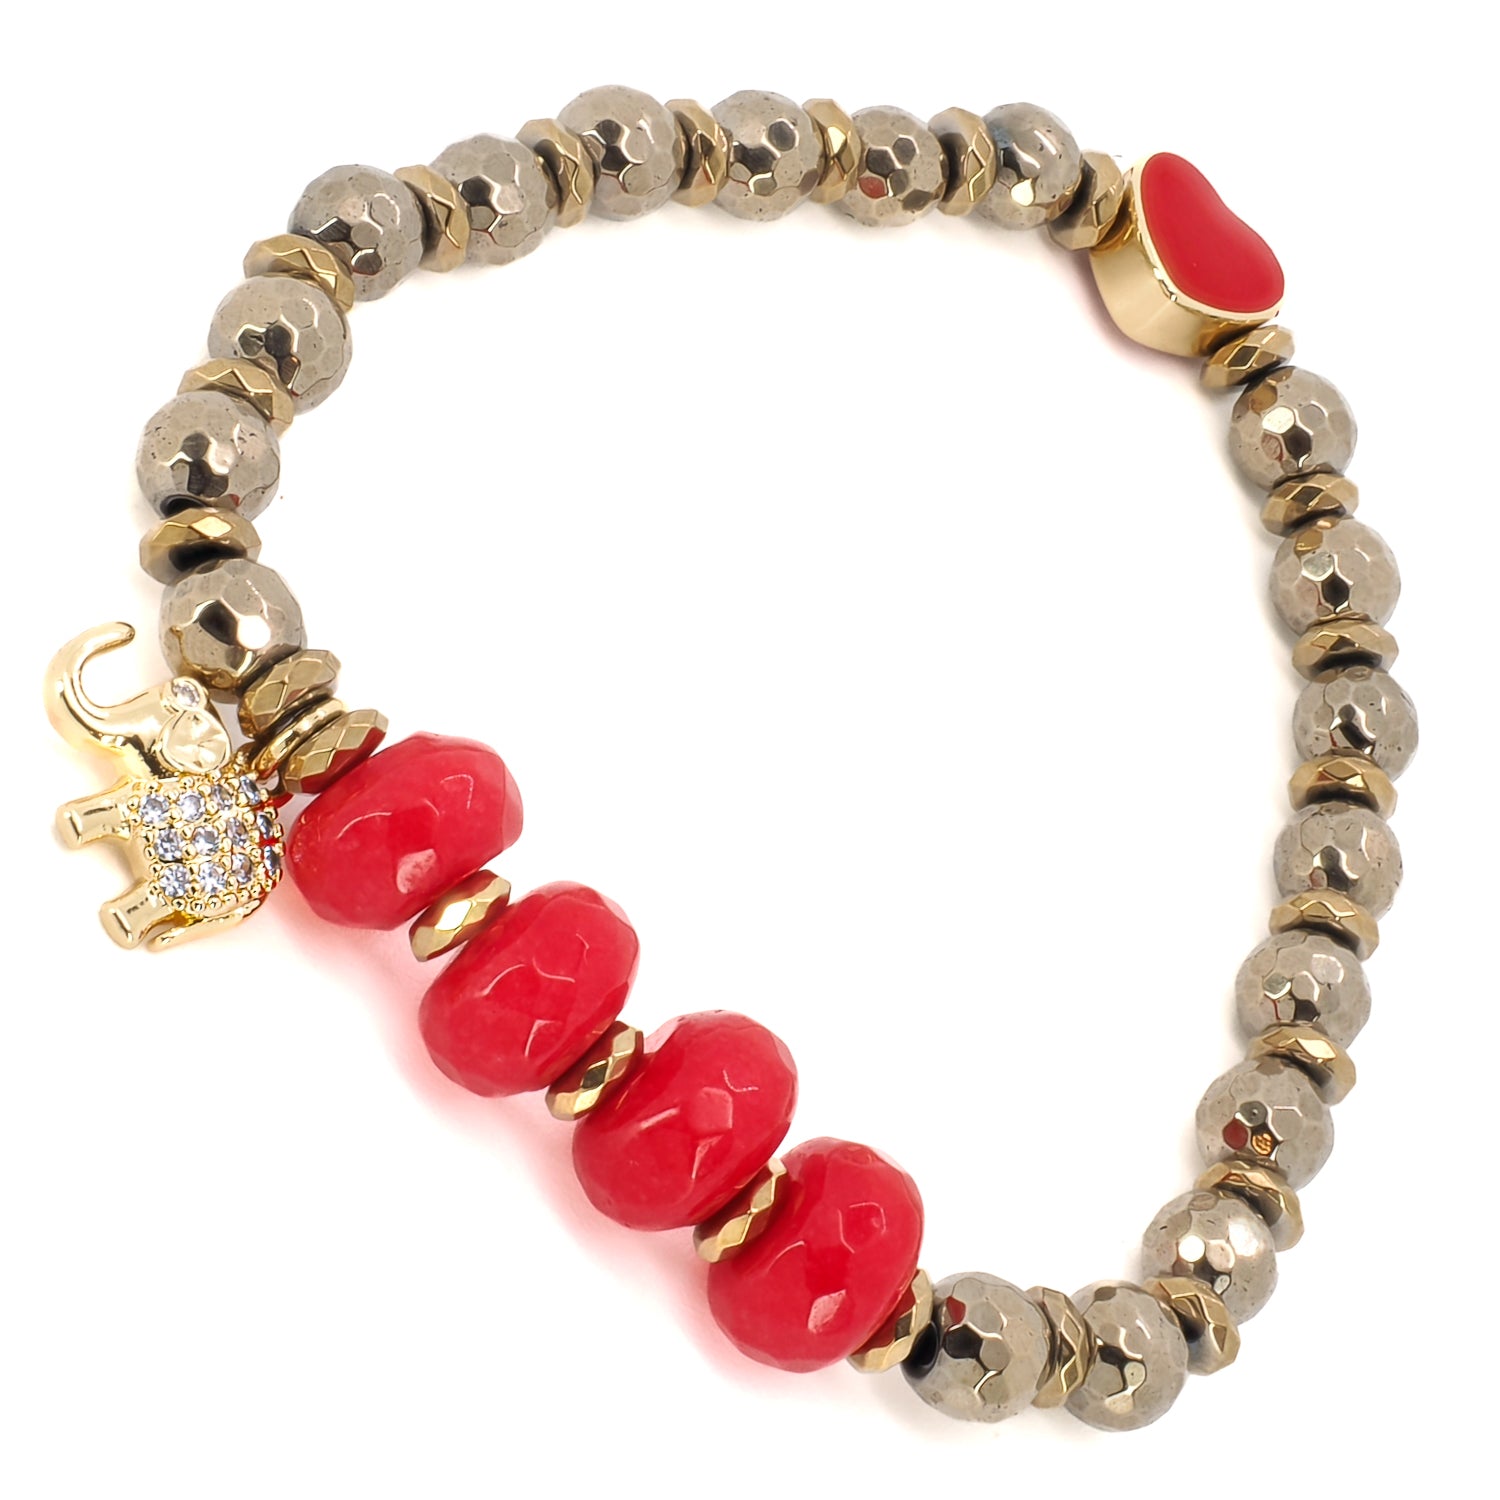 Wear the Red Heart Lucky Elephant Bracelet as a symbol of luck and protection, featuring hematite stone beads and a gold-plated Elephant charm.